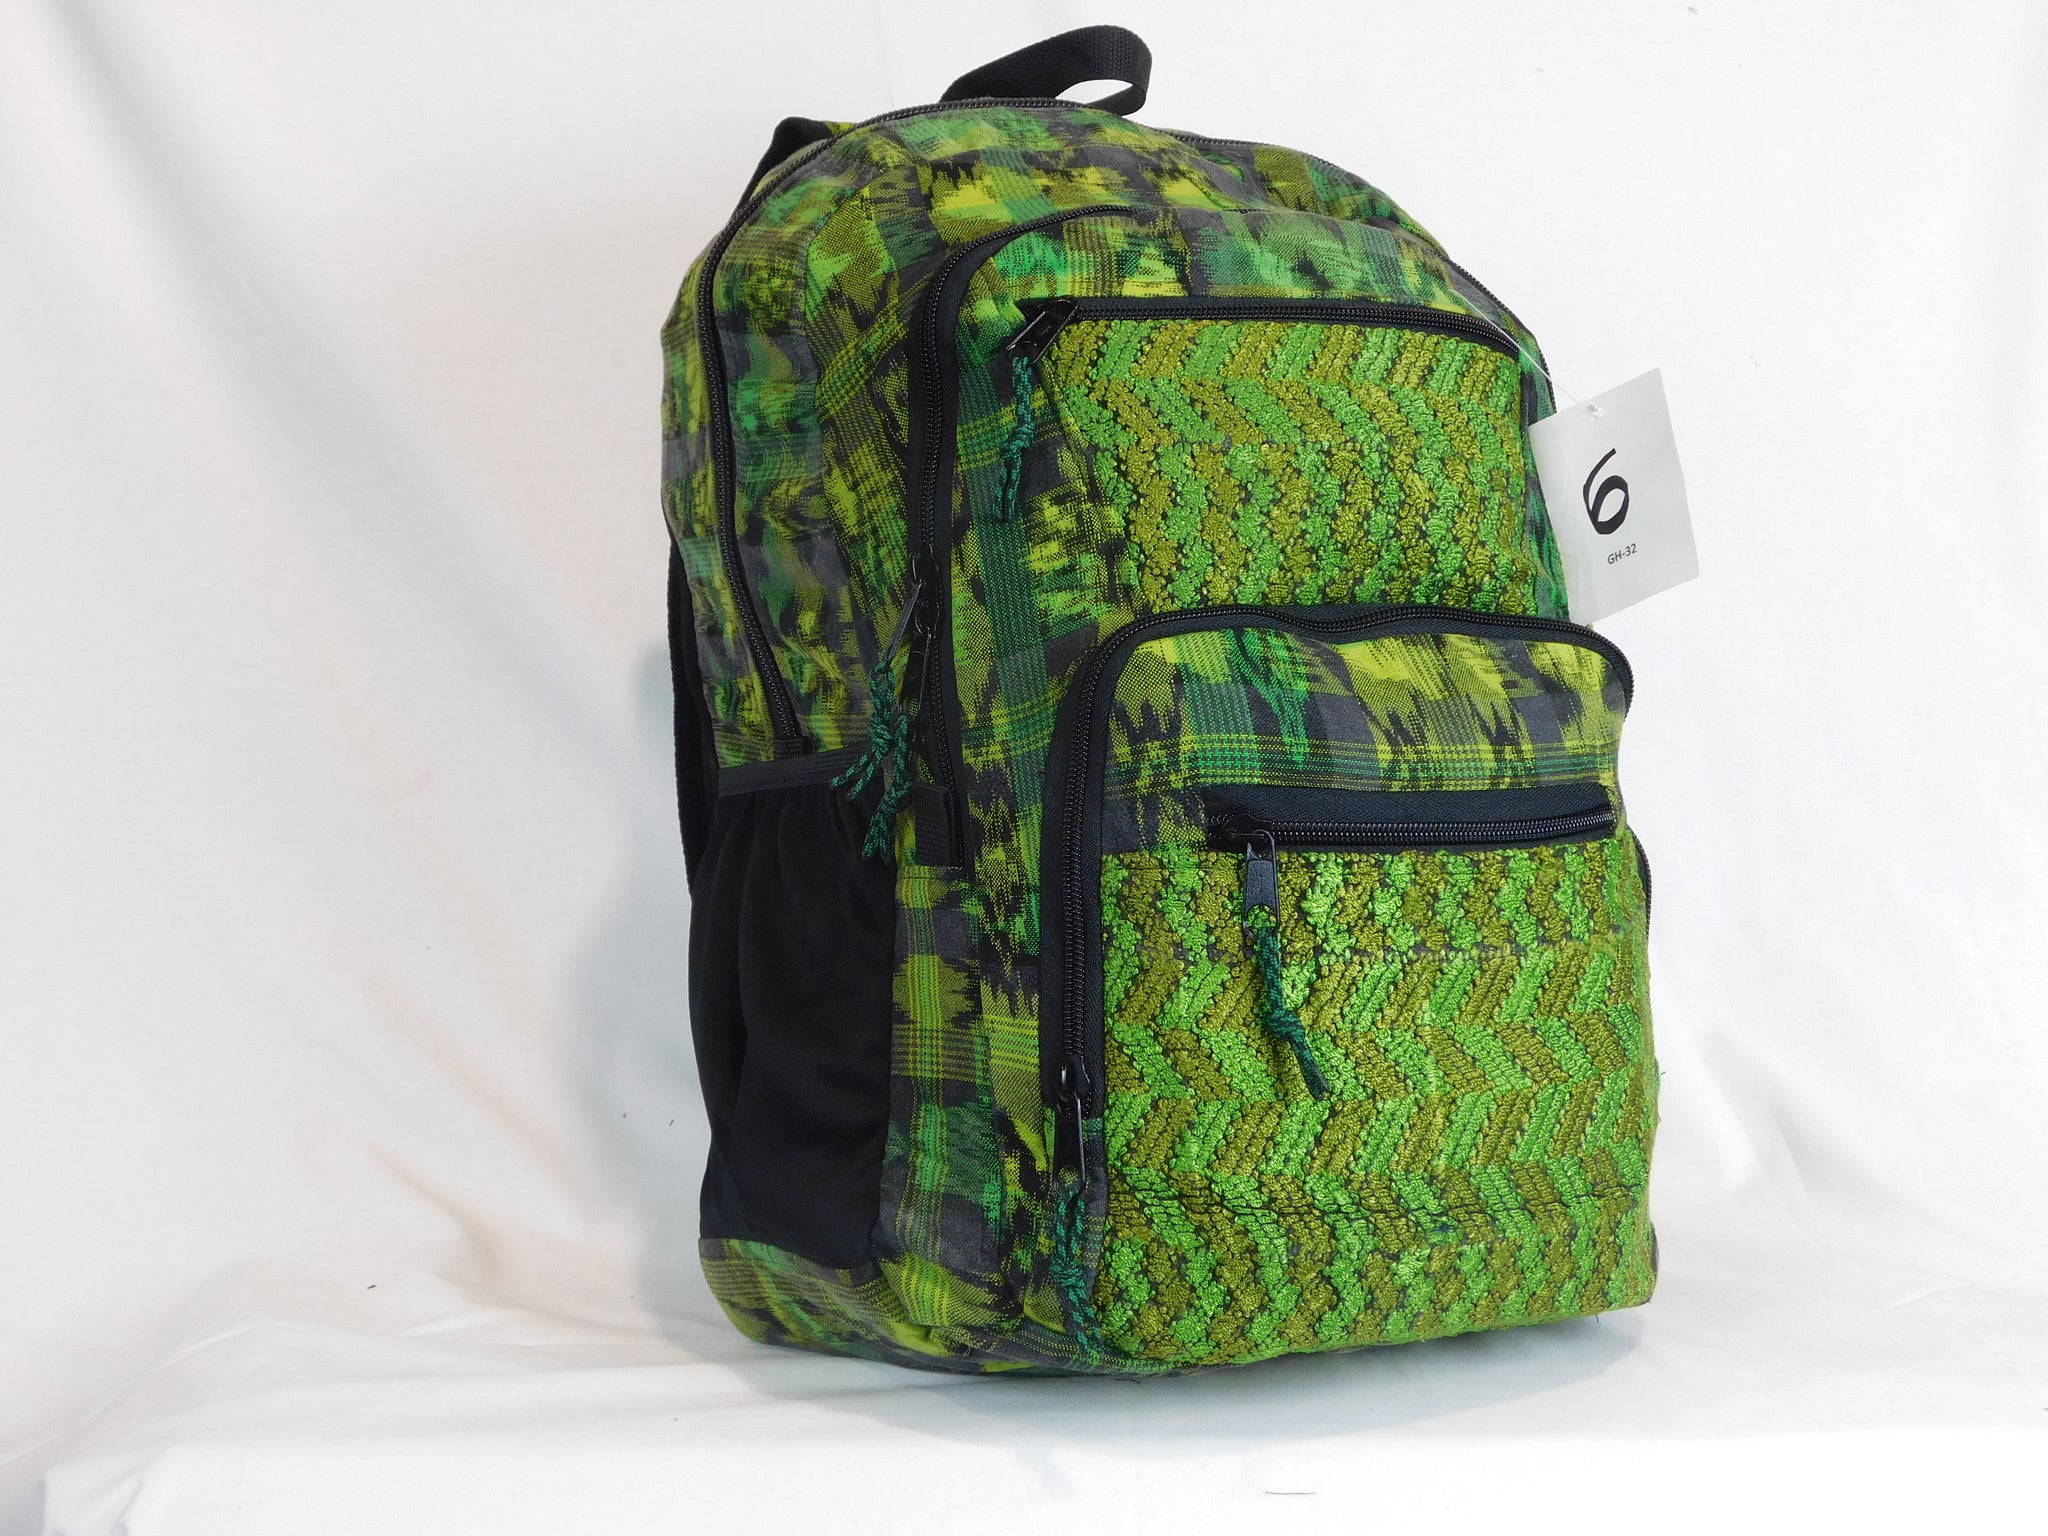 Hand-Woven Backpack with Hand-Brocaded Accents (Large)